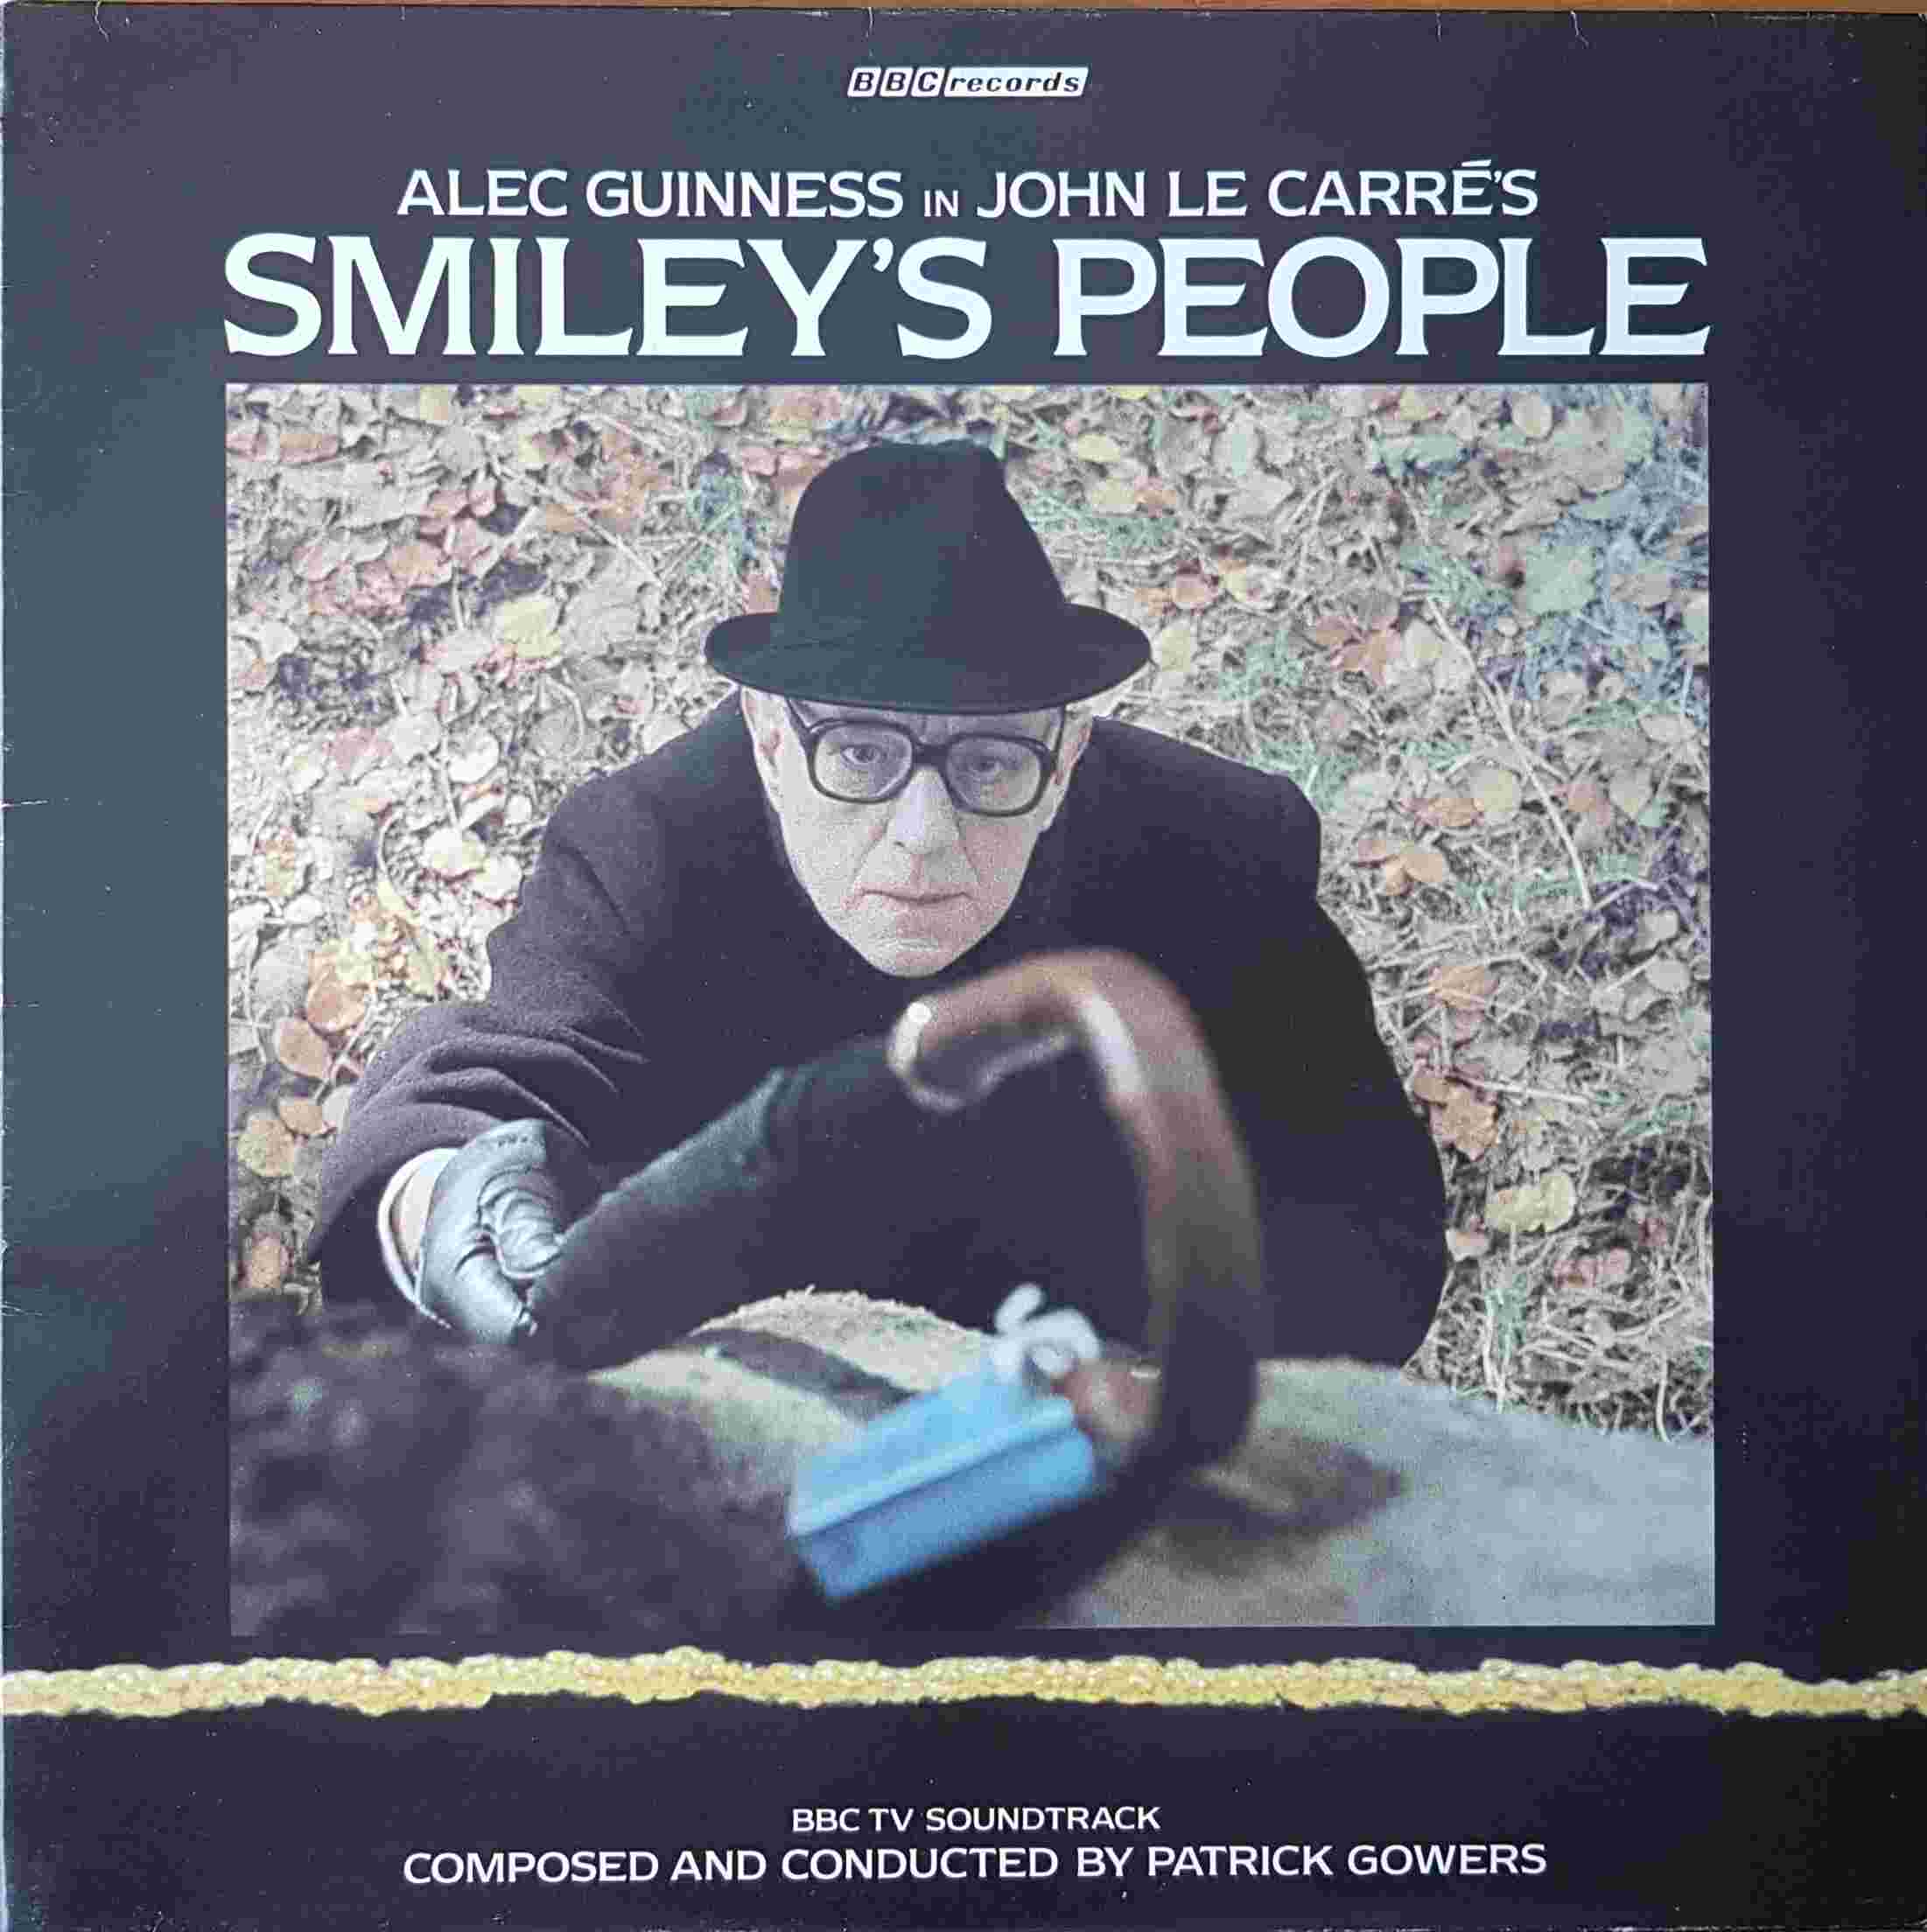 Picture of REP 439 Smiley's people by artist Patrick Gowers from the BBC albums - Records and Tapes library